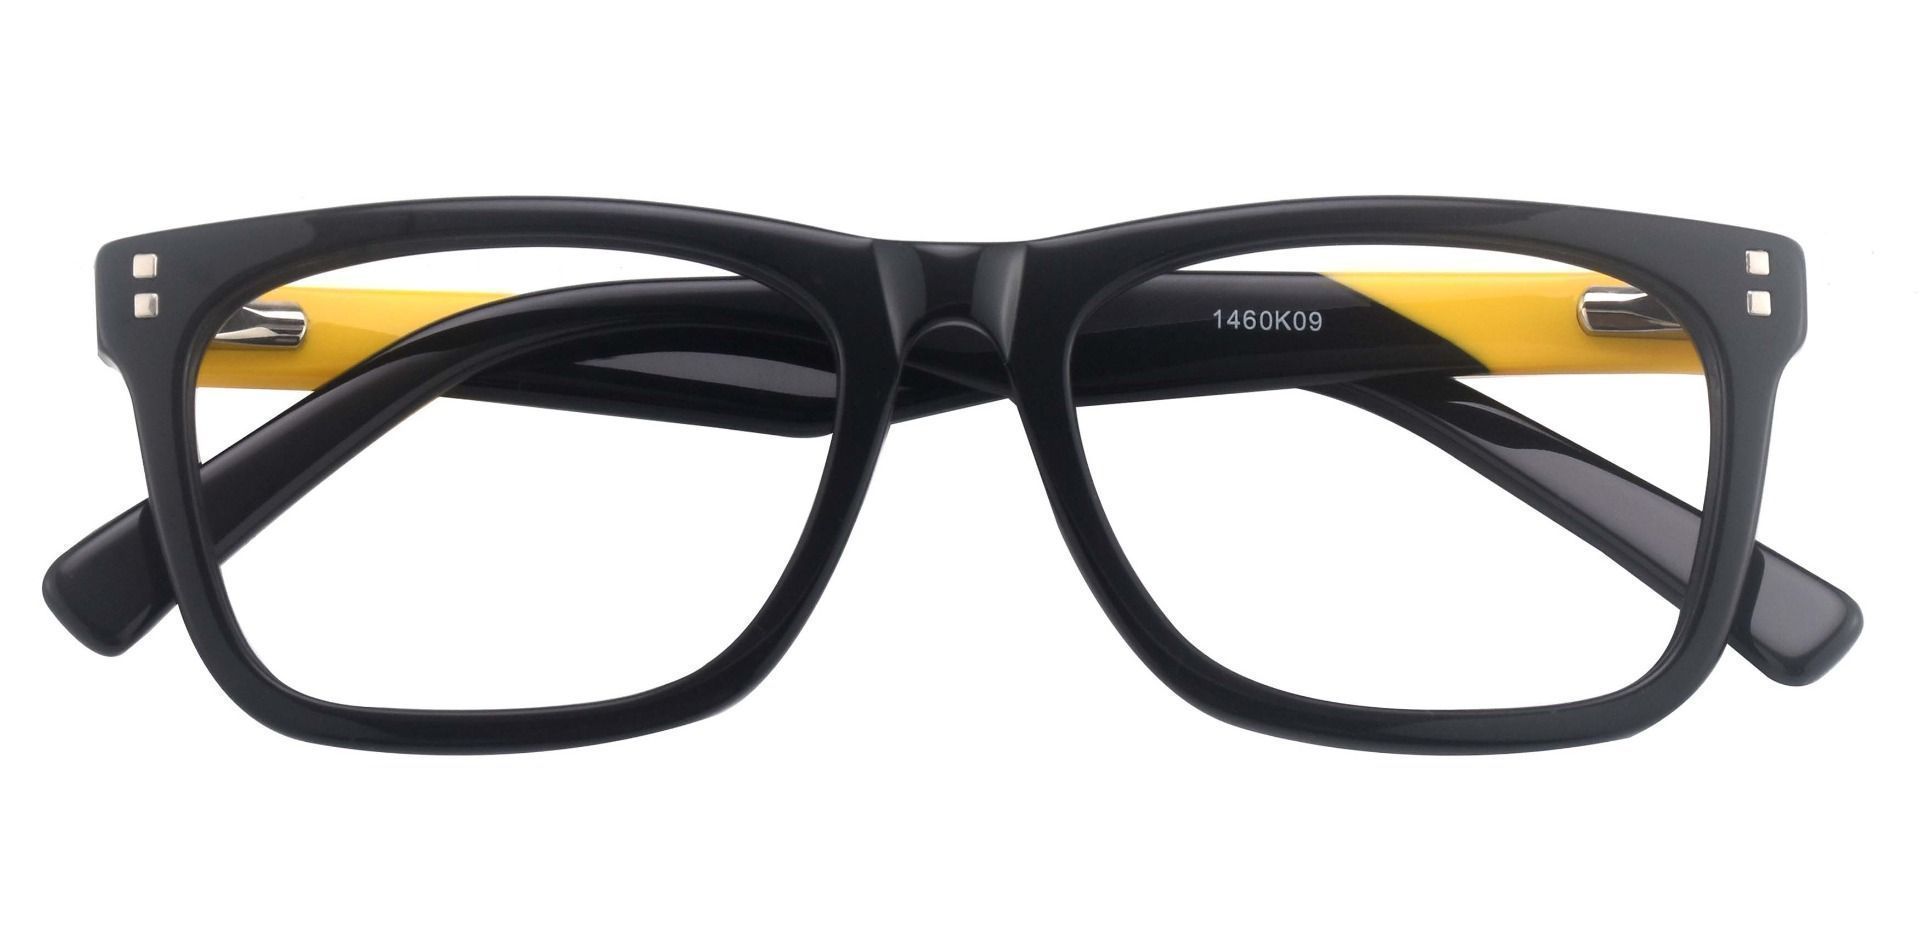 Liberty Rectangle Prescription Glasses - The Frame Is Black And Gold